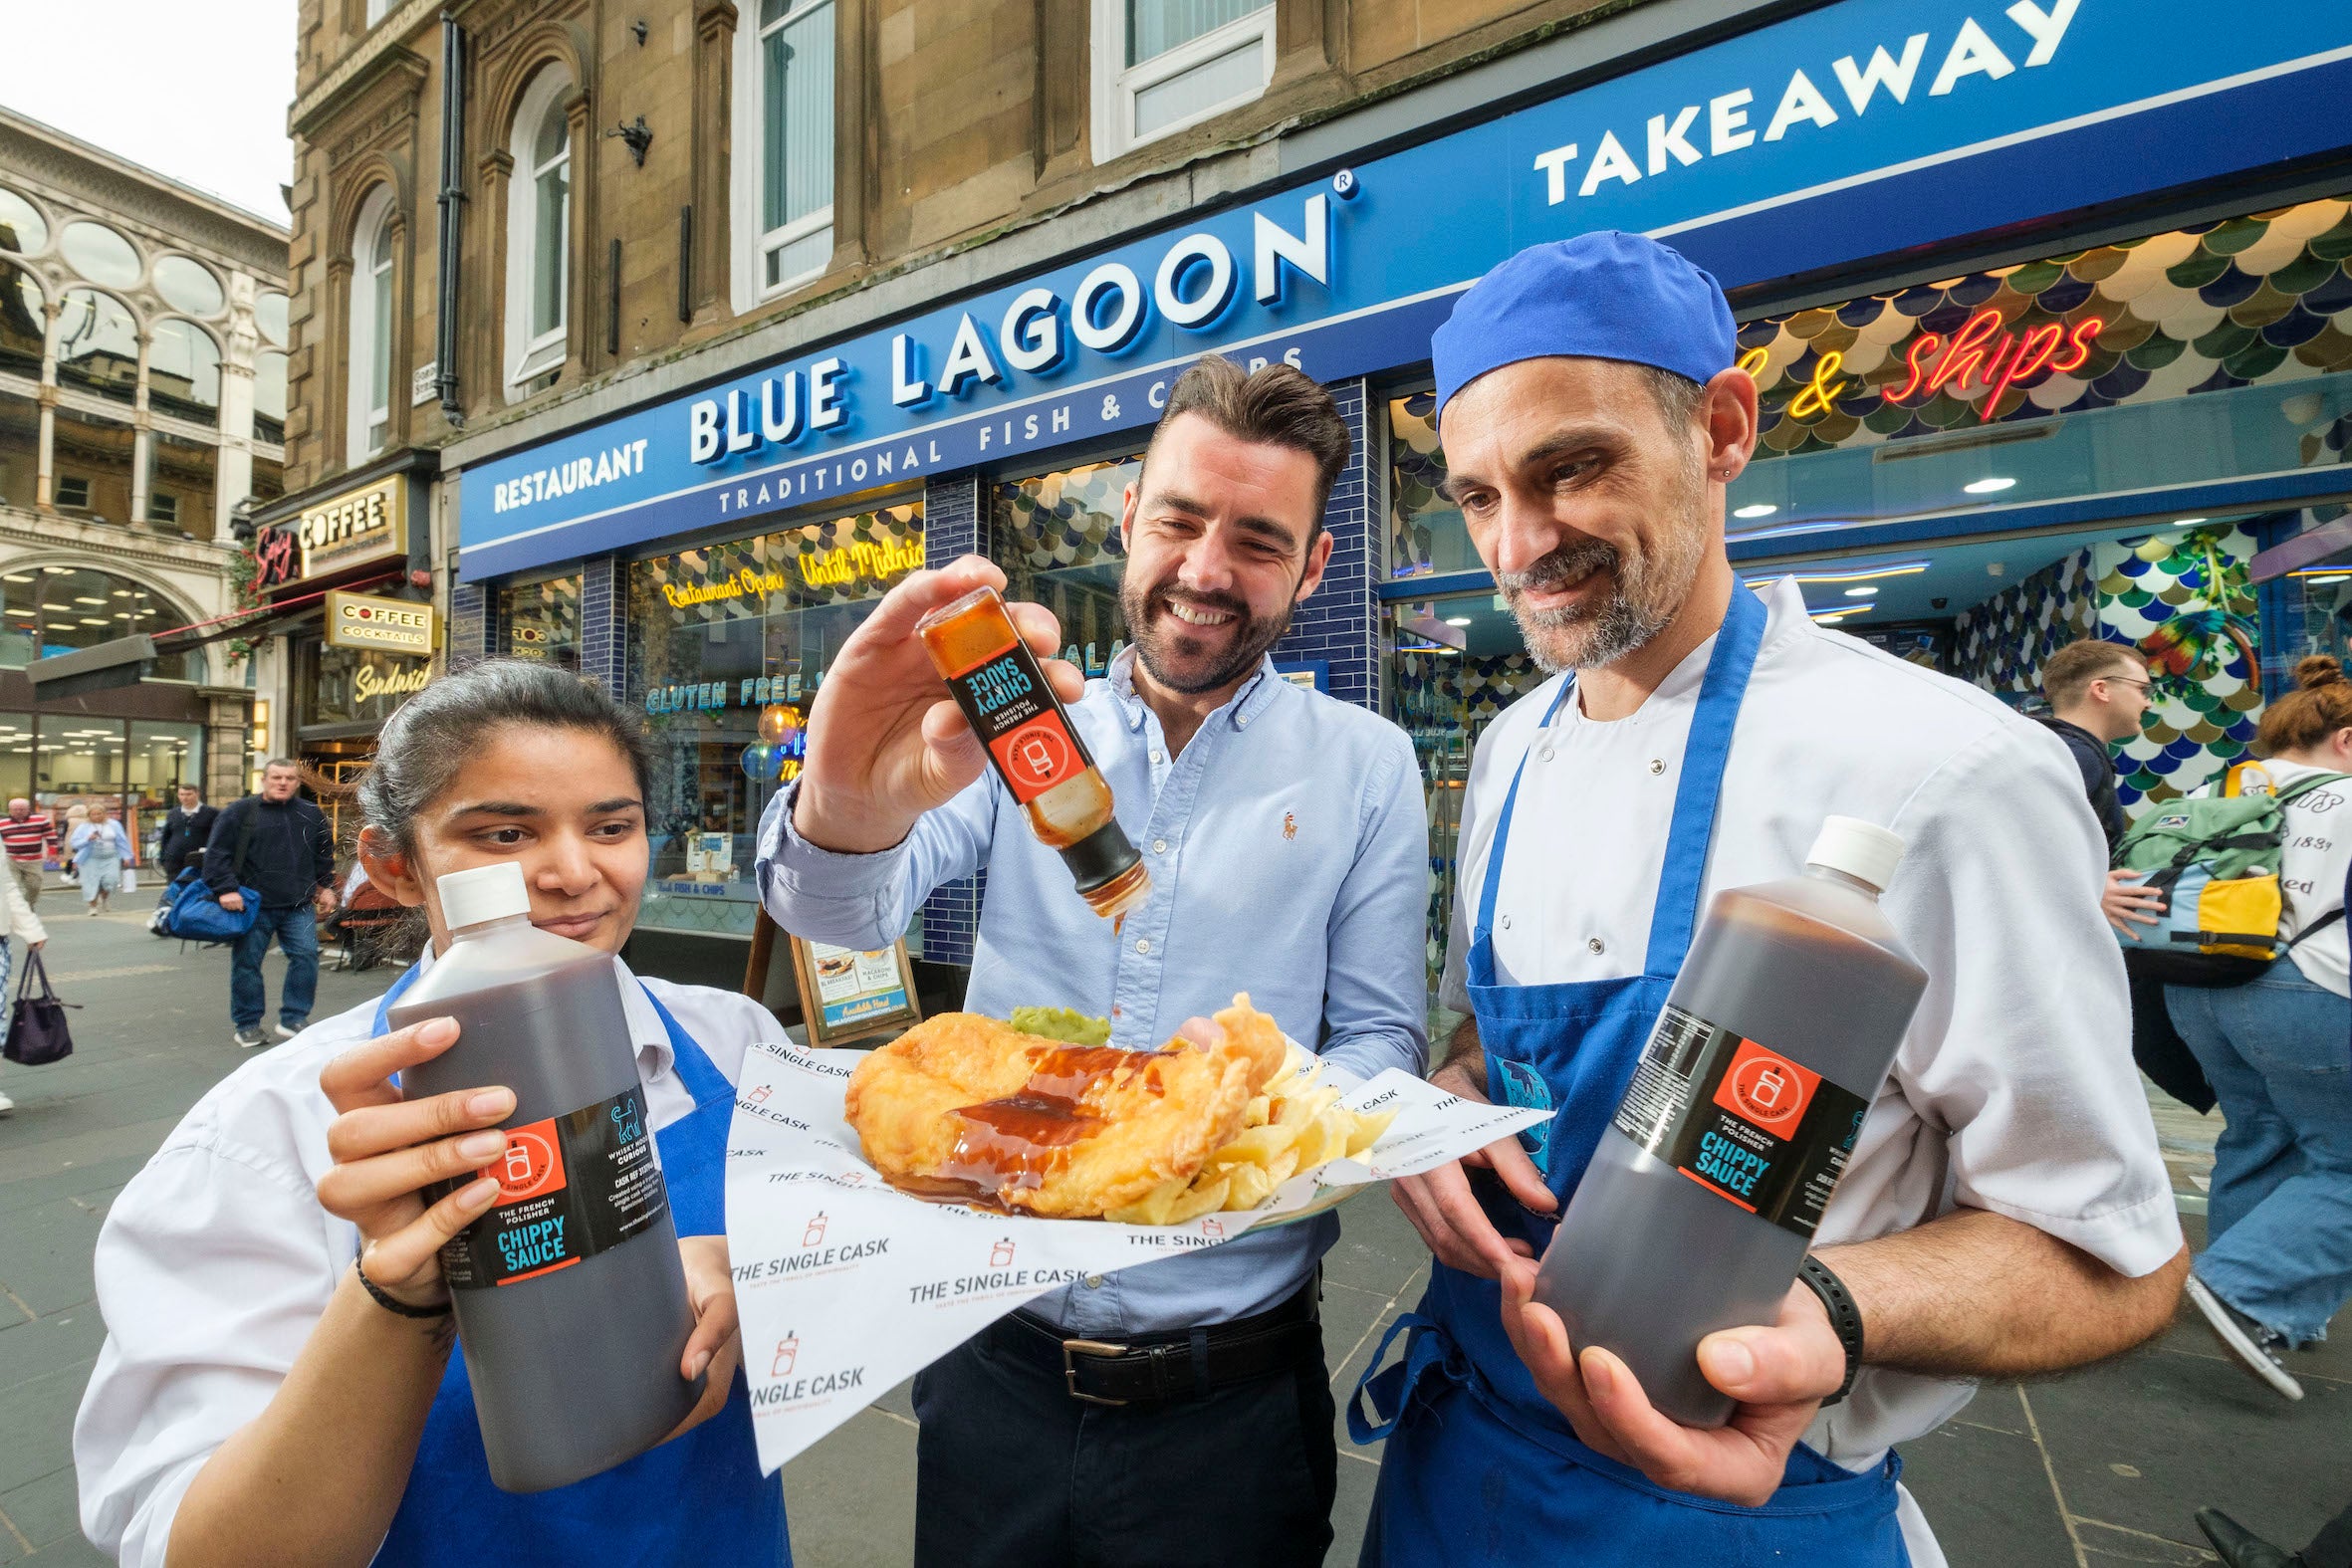 We team-up with Glasgow's Blue Lagoon to give away 50 fish suppers with whisky-sauce